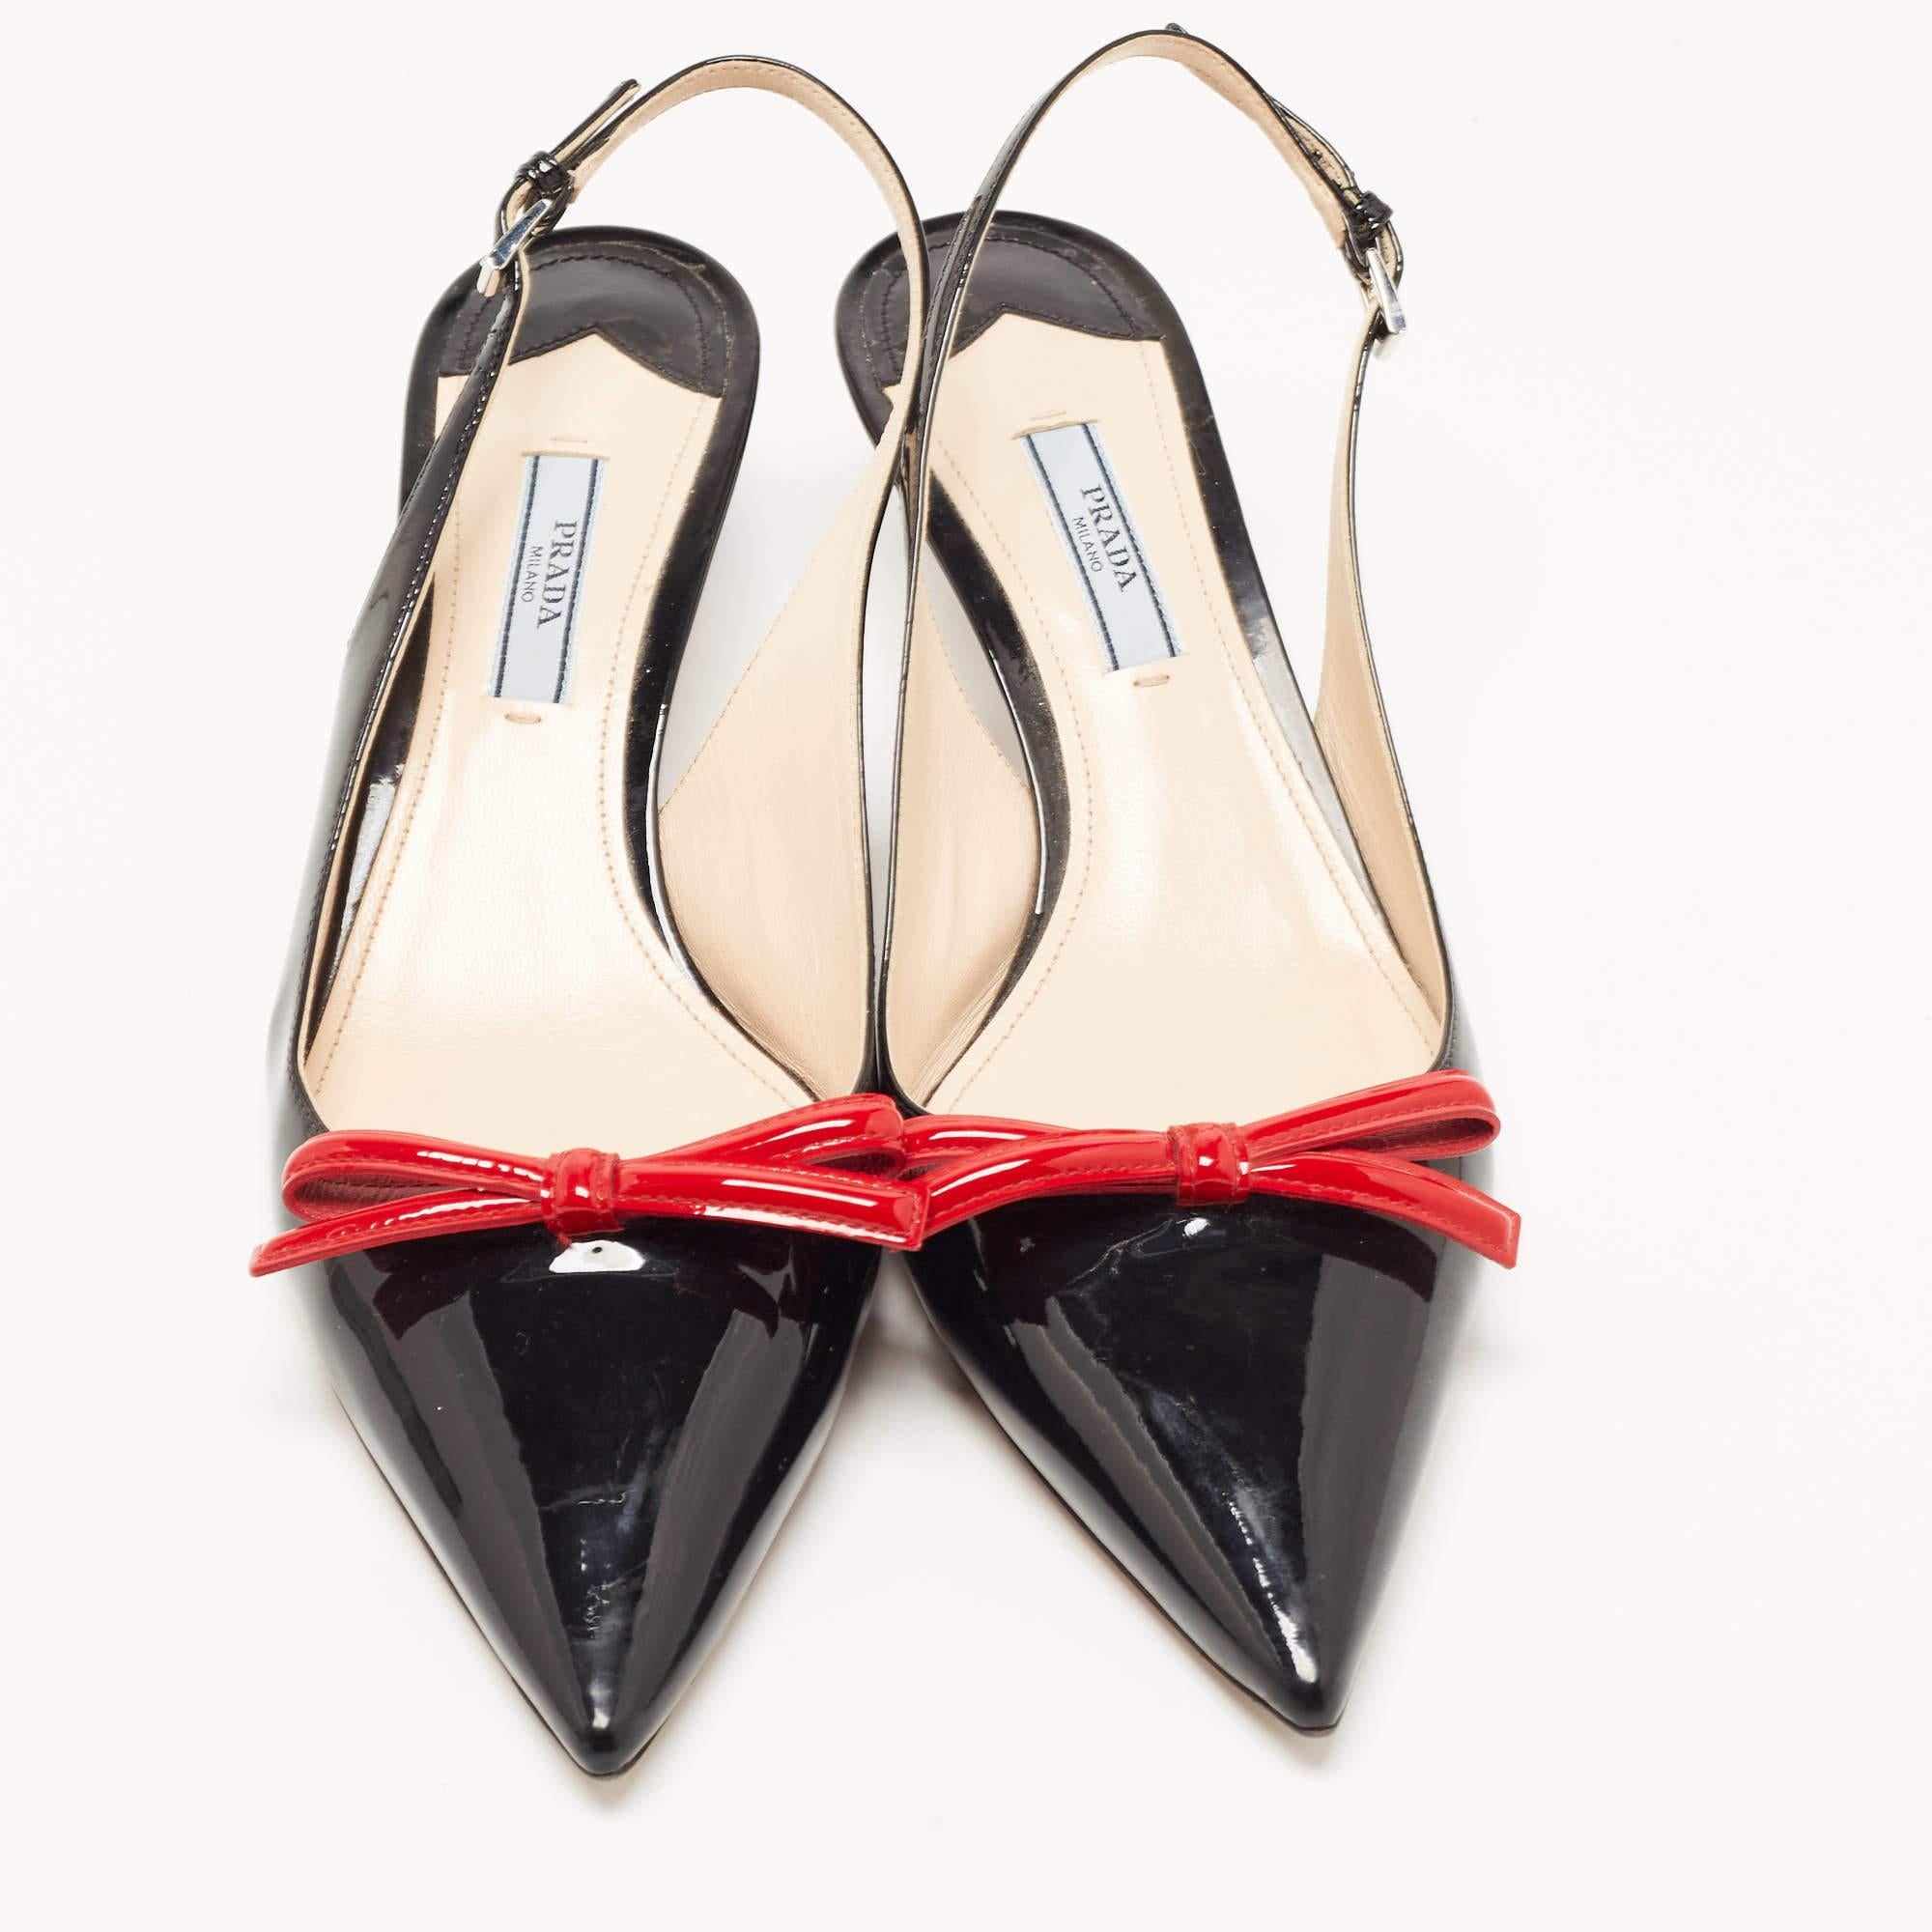 Perfectly sewn and finished to ensure an elegant look and fit, these Prada slingback shoes are a purchase you'll love flaunting. They look great on the feet.

